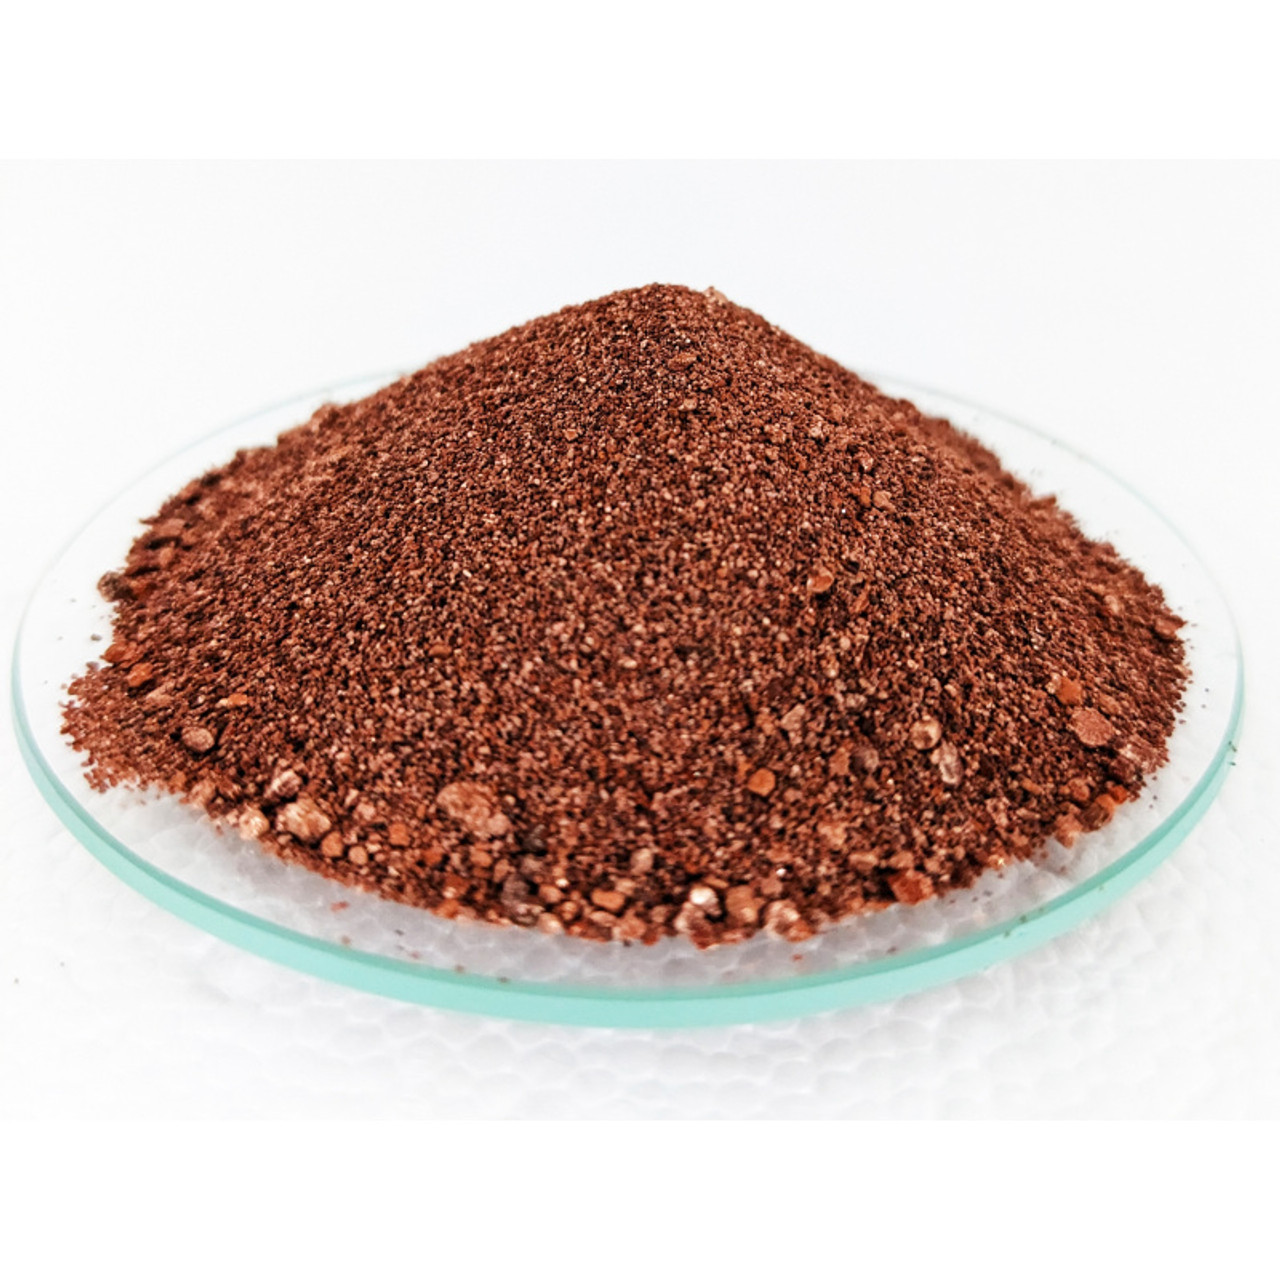 Copper Powder - Materials - Materials Library - Institute of Making